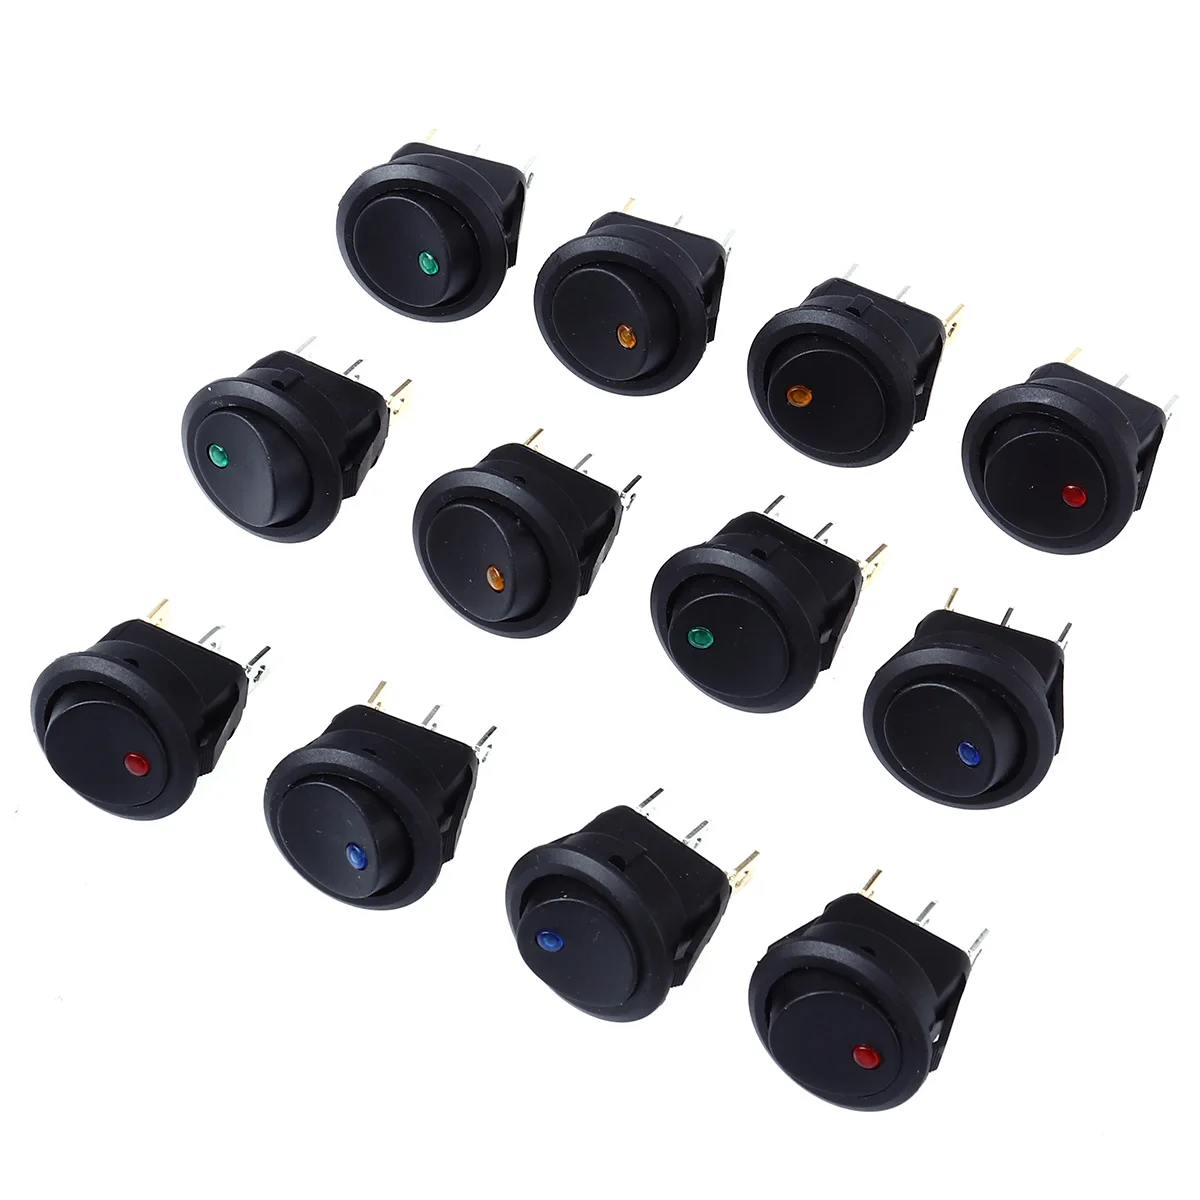 

12PCS 12V 20A Car Switch Rocker Toggle LED Switch SPST On-Off Control with 4 Color Bulbs Button Switch For Car Truck RV